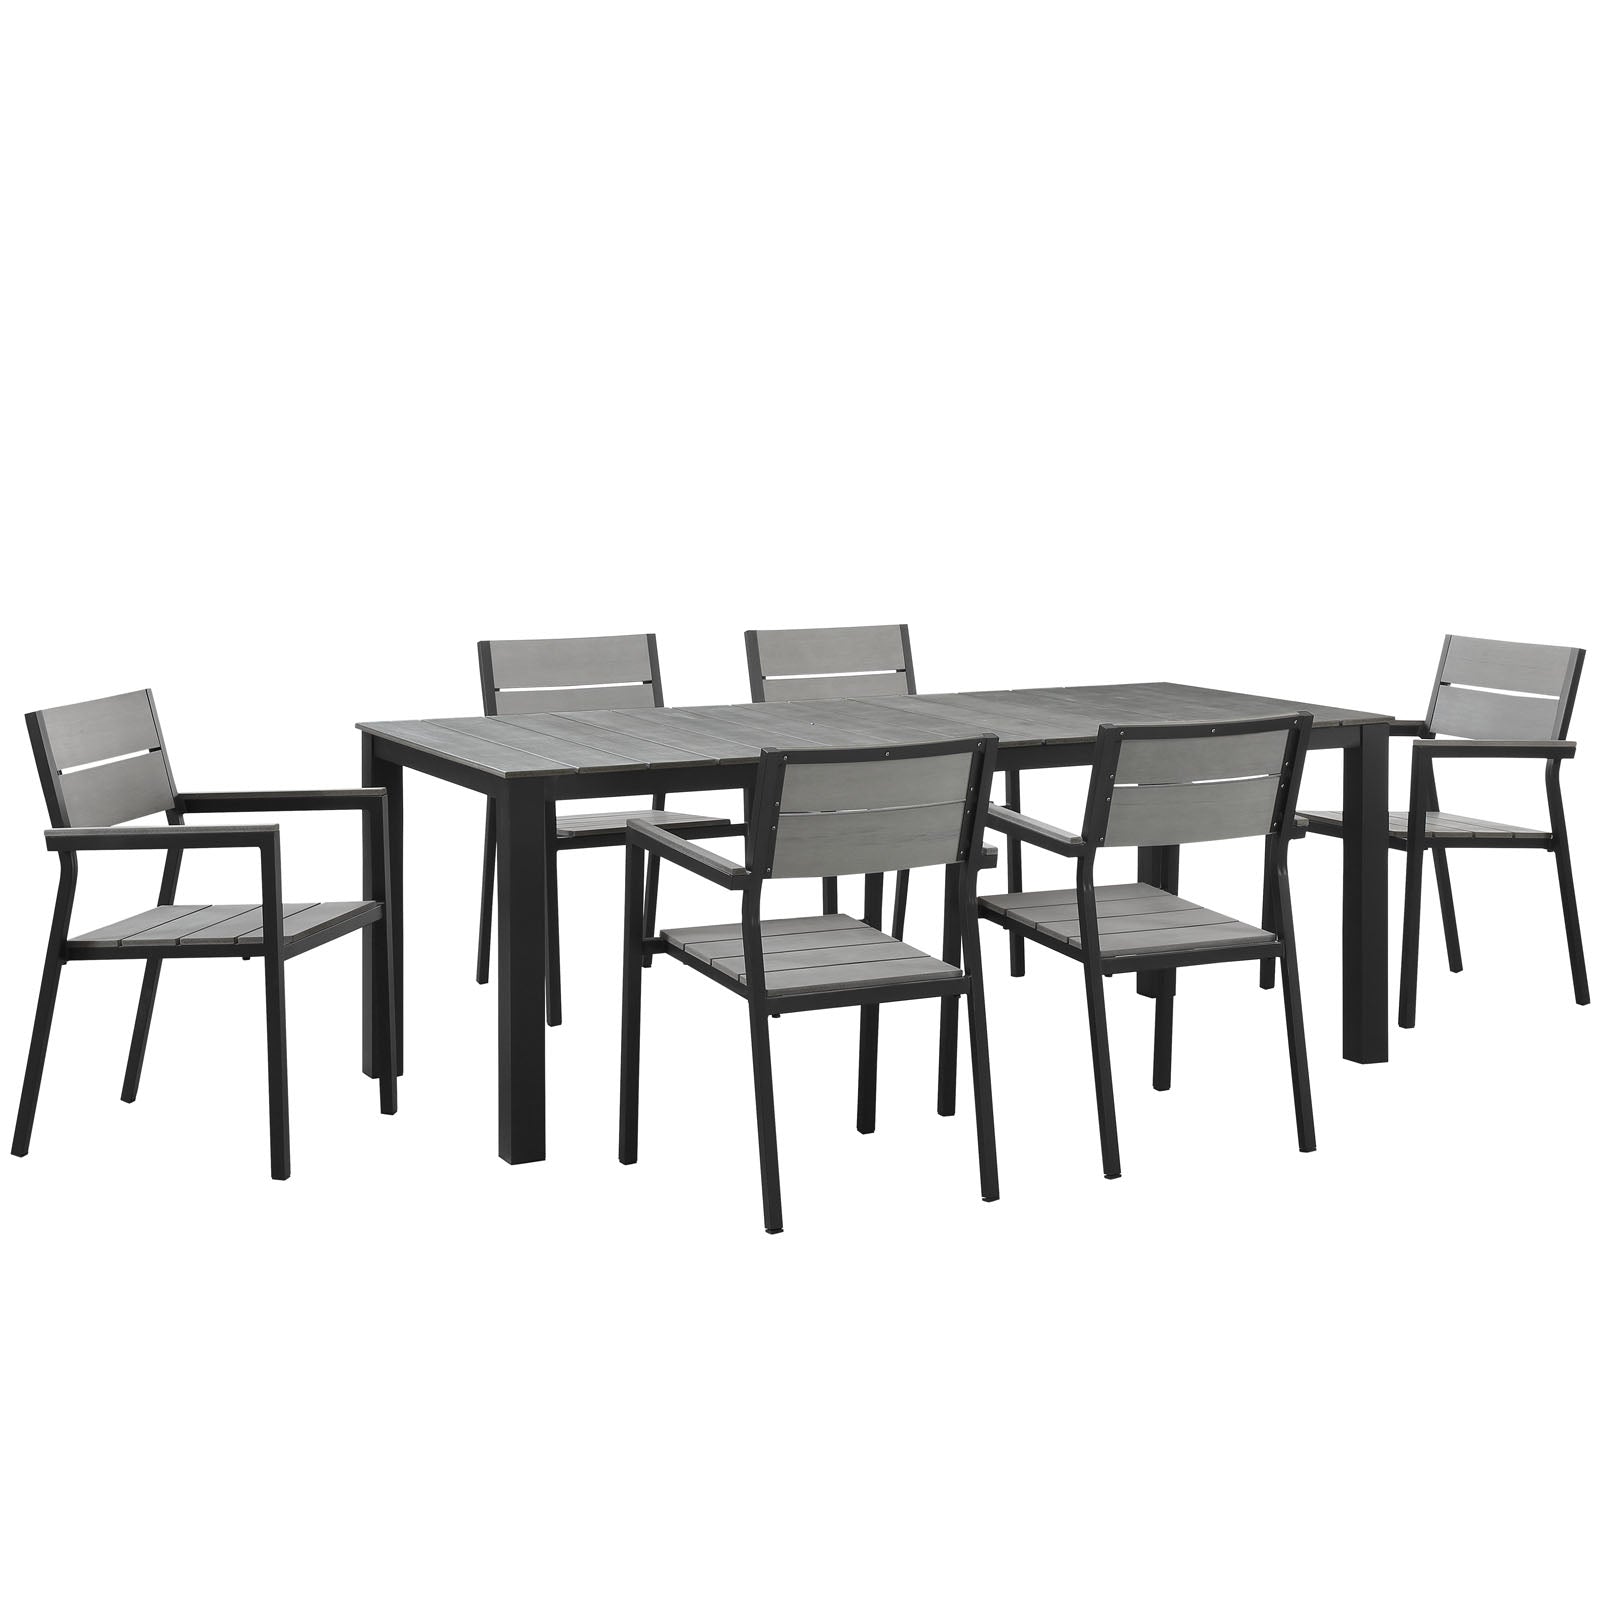 Modway Outdoor Dining Sets - Maine 7 Piece Outdoor Patio Dining Set Brown & Gray